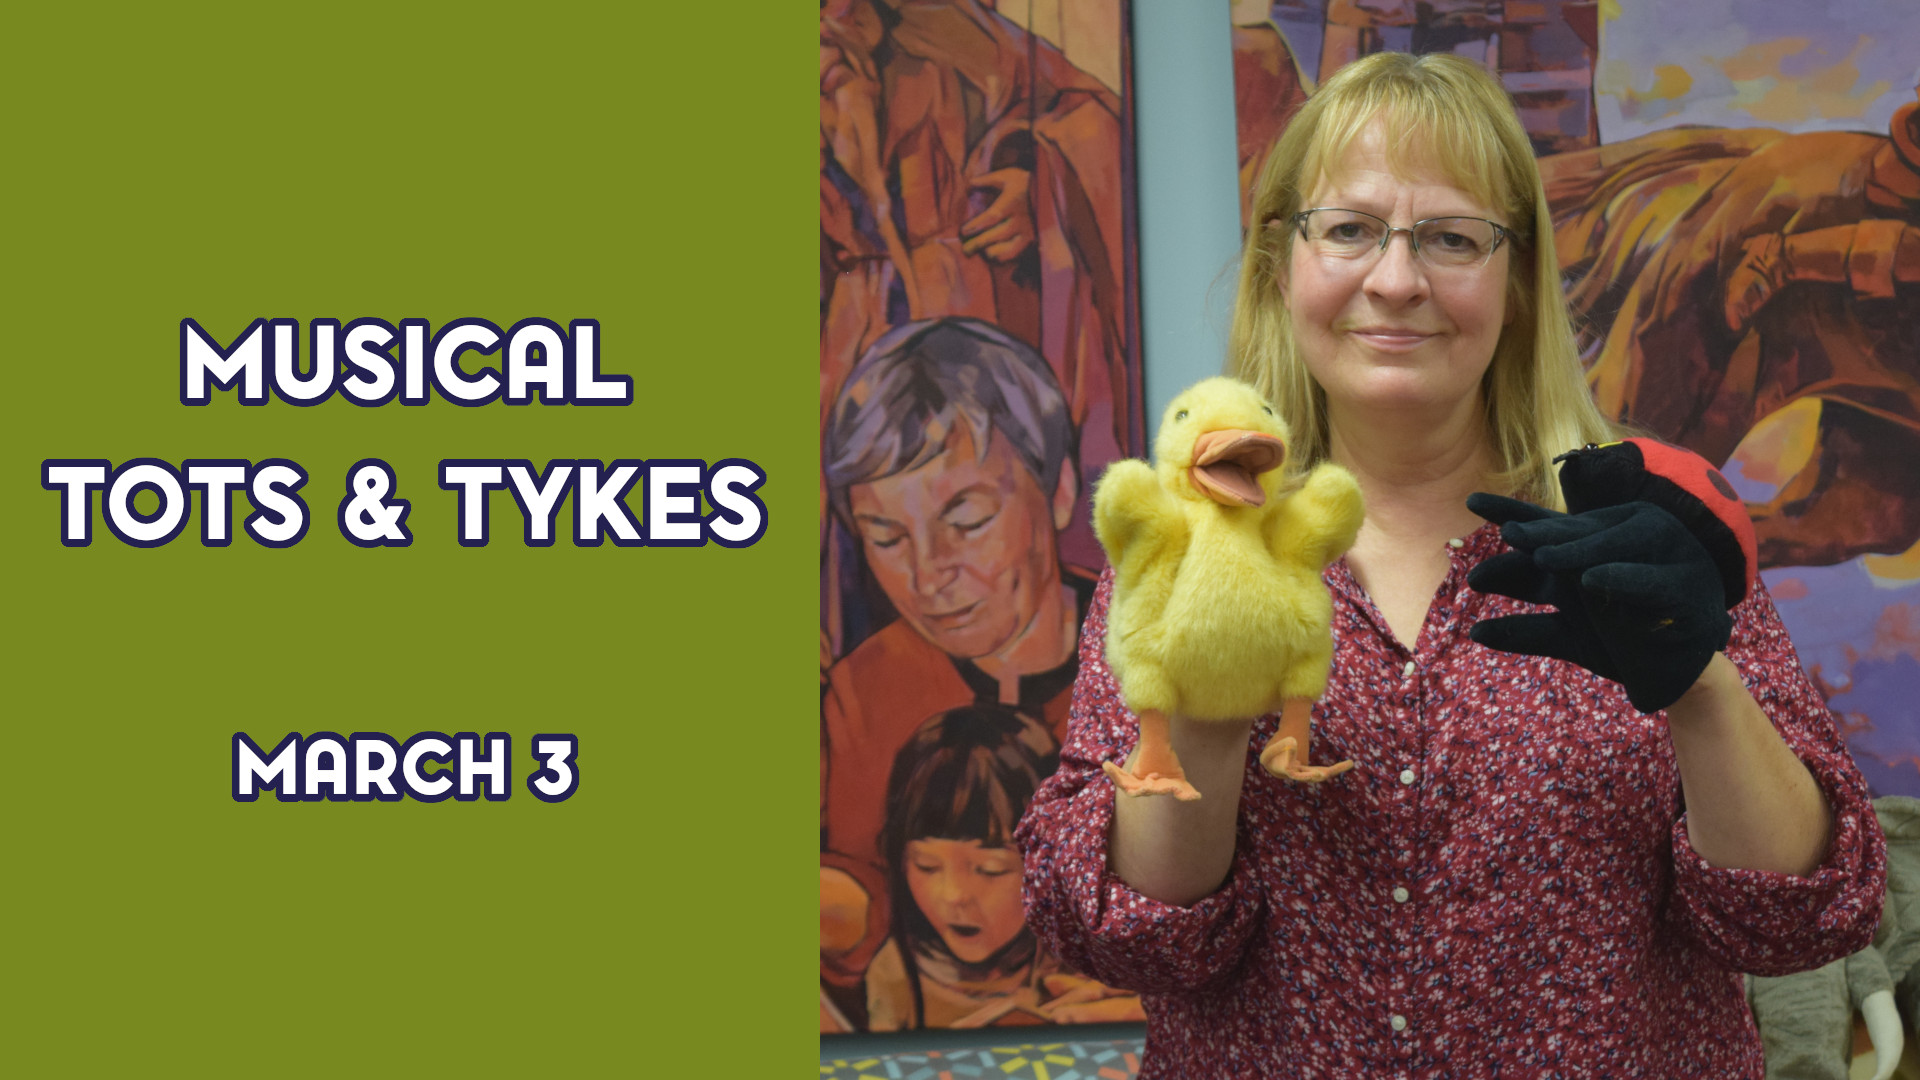 A woman holds stuffed animals next to the text "Musical Tots & Tykes March 3"